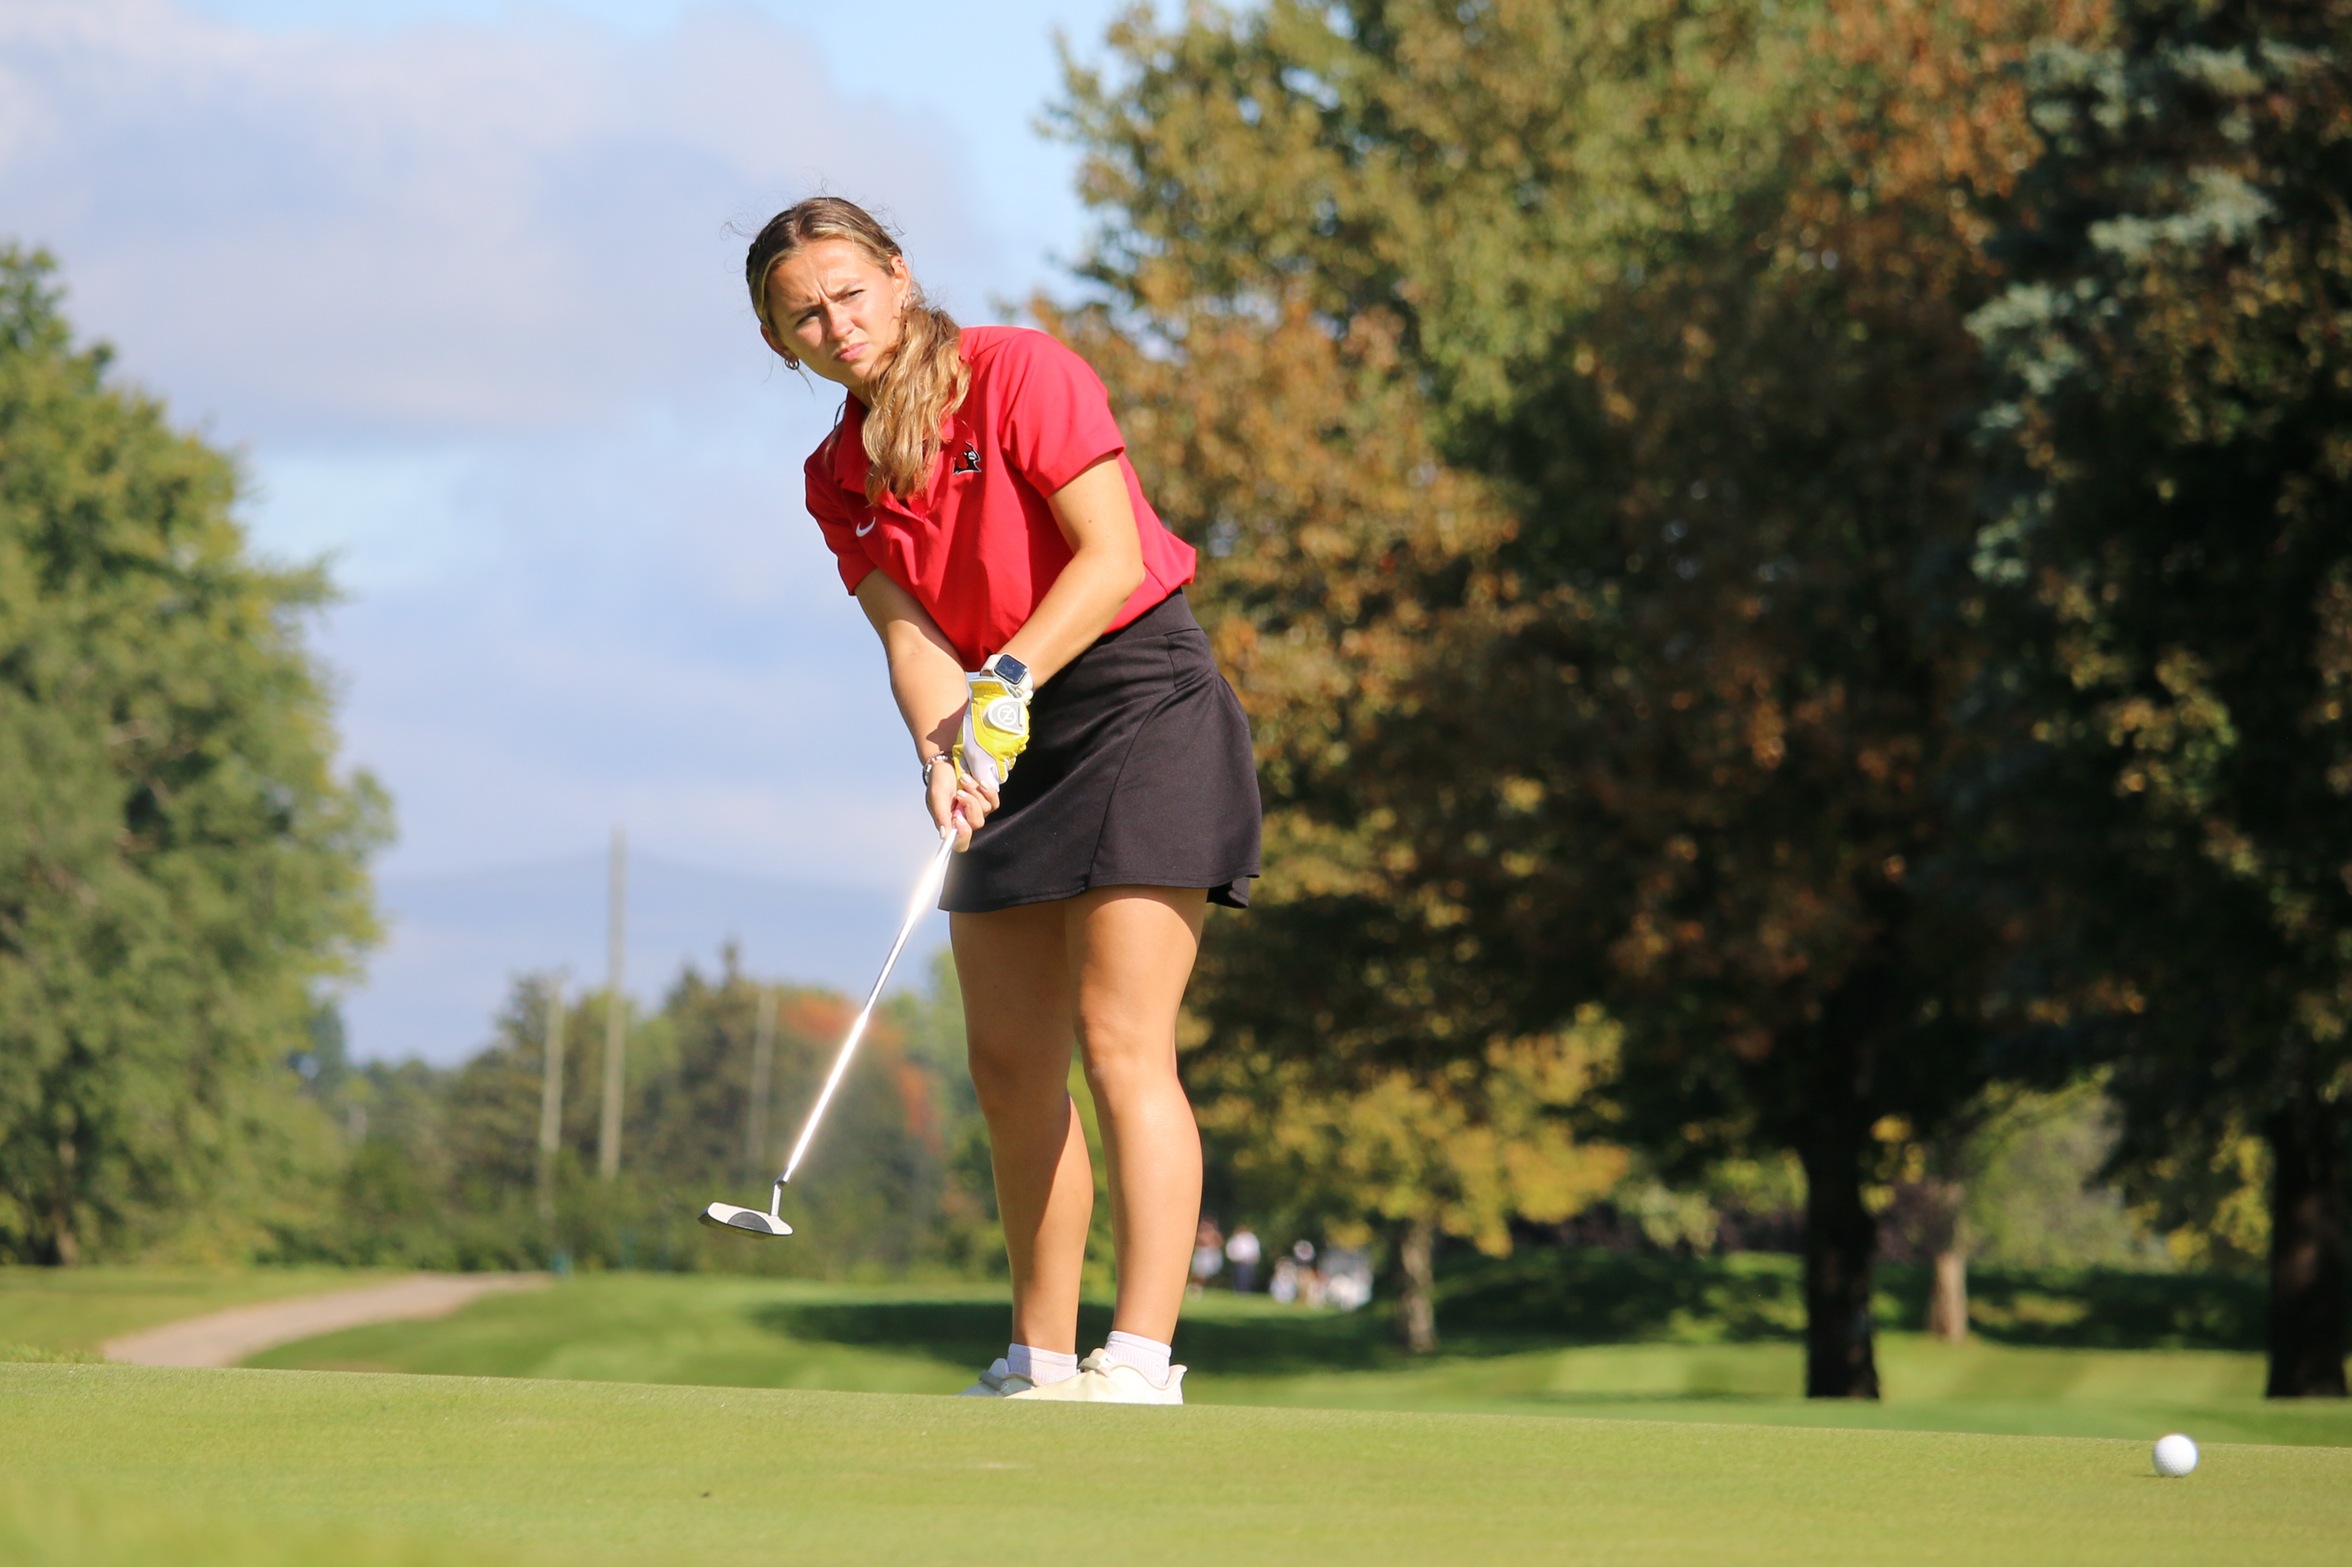 Women's Golf places 7th at the LTU Fall Invite